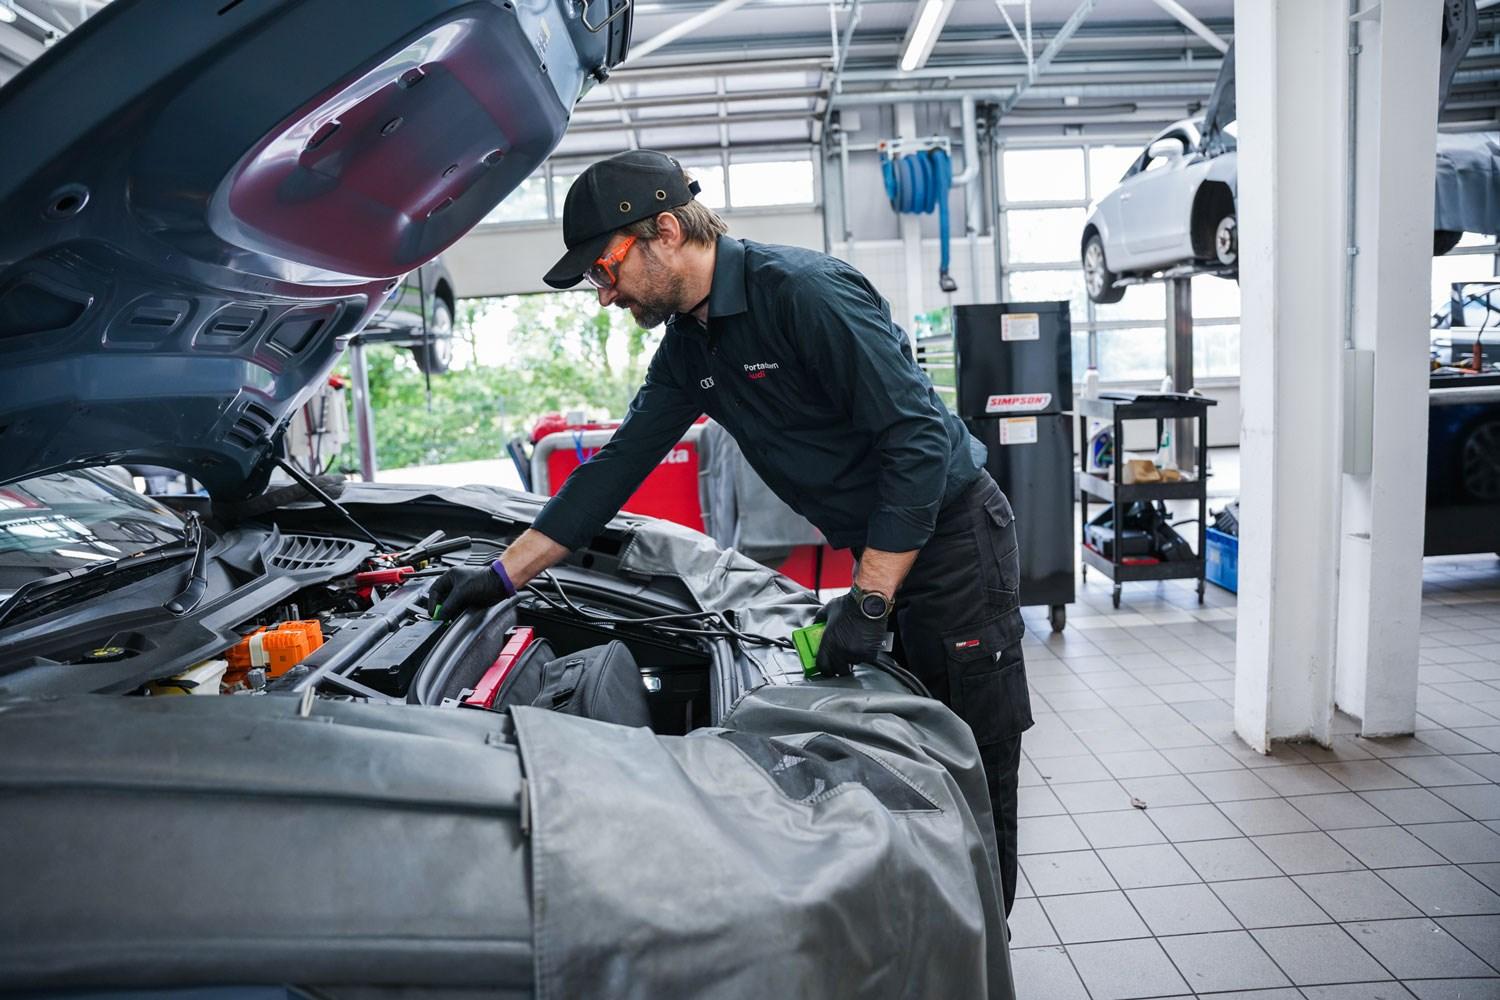 Audi Repair Specialist inspects under the hood of an Audi A5 during routine maintenance at Portadown Audi